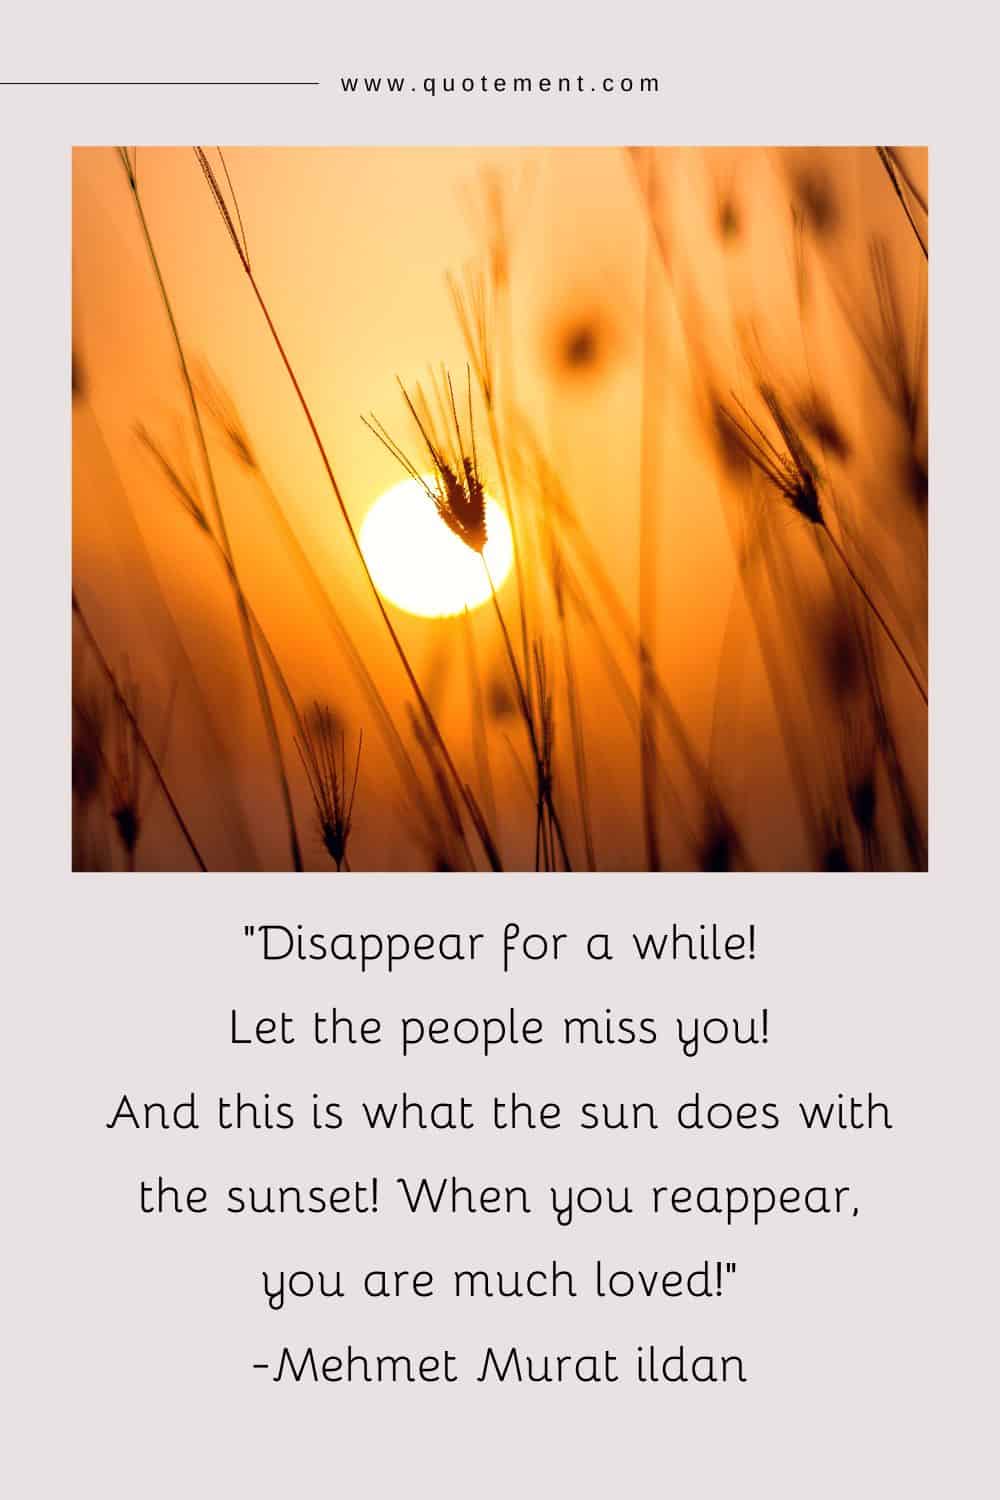 Disappear for a while! Let the people miss you! And this is what the sun does with the sunset! When you reappear, you are much loved